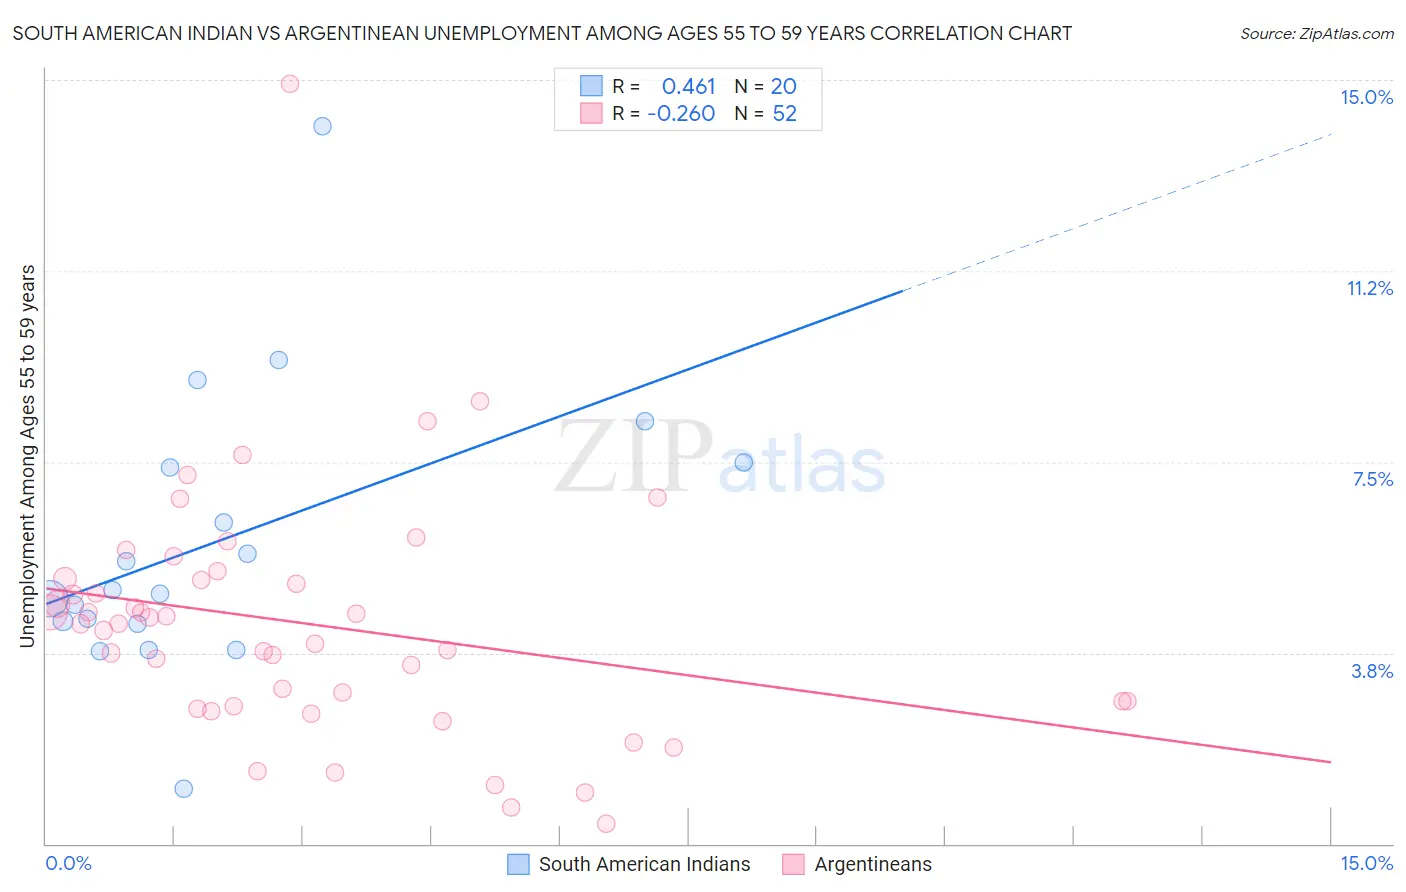 South American Indian vs Argentinean Unemployment Among Ages 55 to 59 years